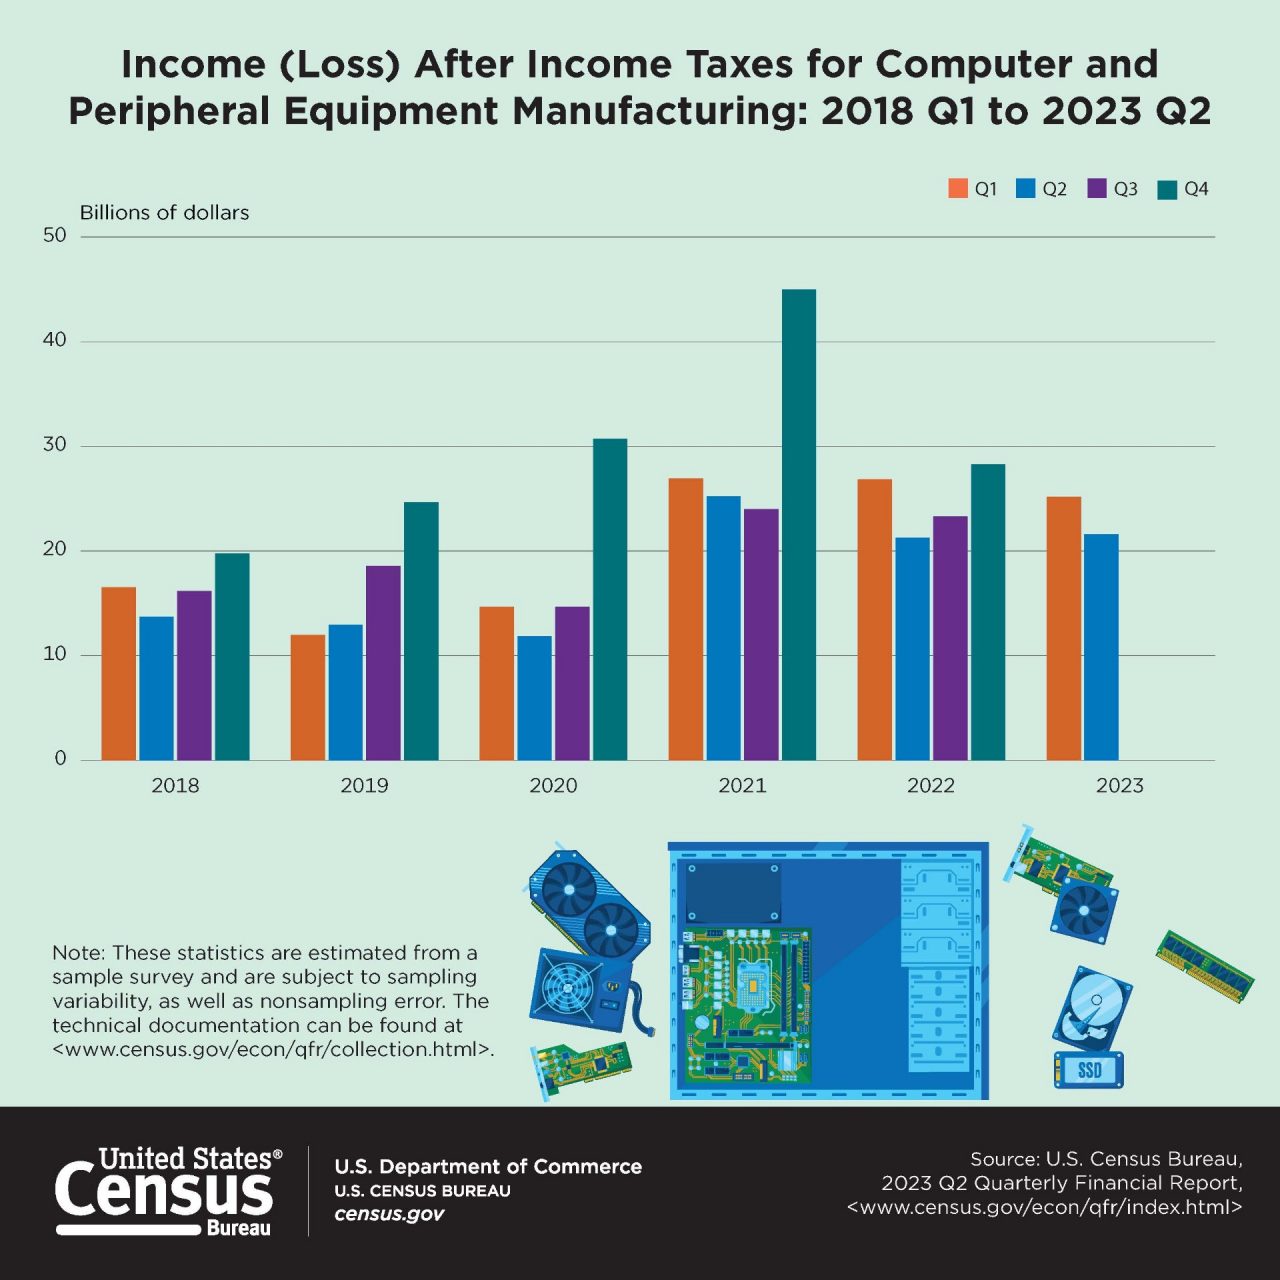 Income (Loss) After Income Taxes for Computer and Peripheral Equipment Manufacturing: 2018 Q1 to 2023 Q2